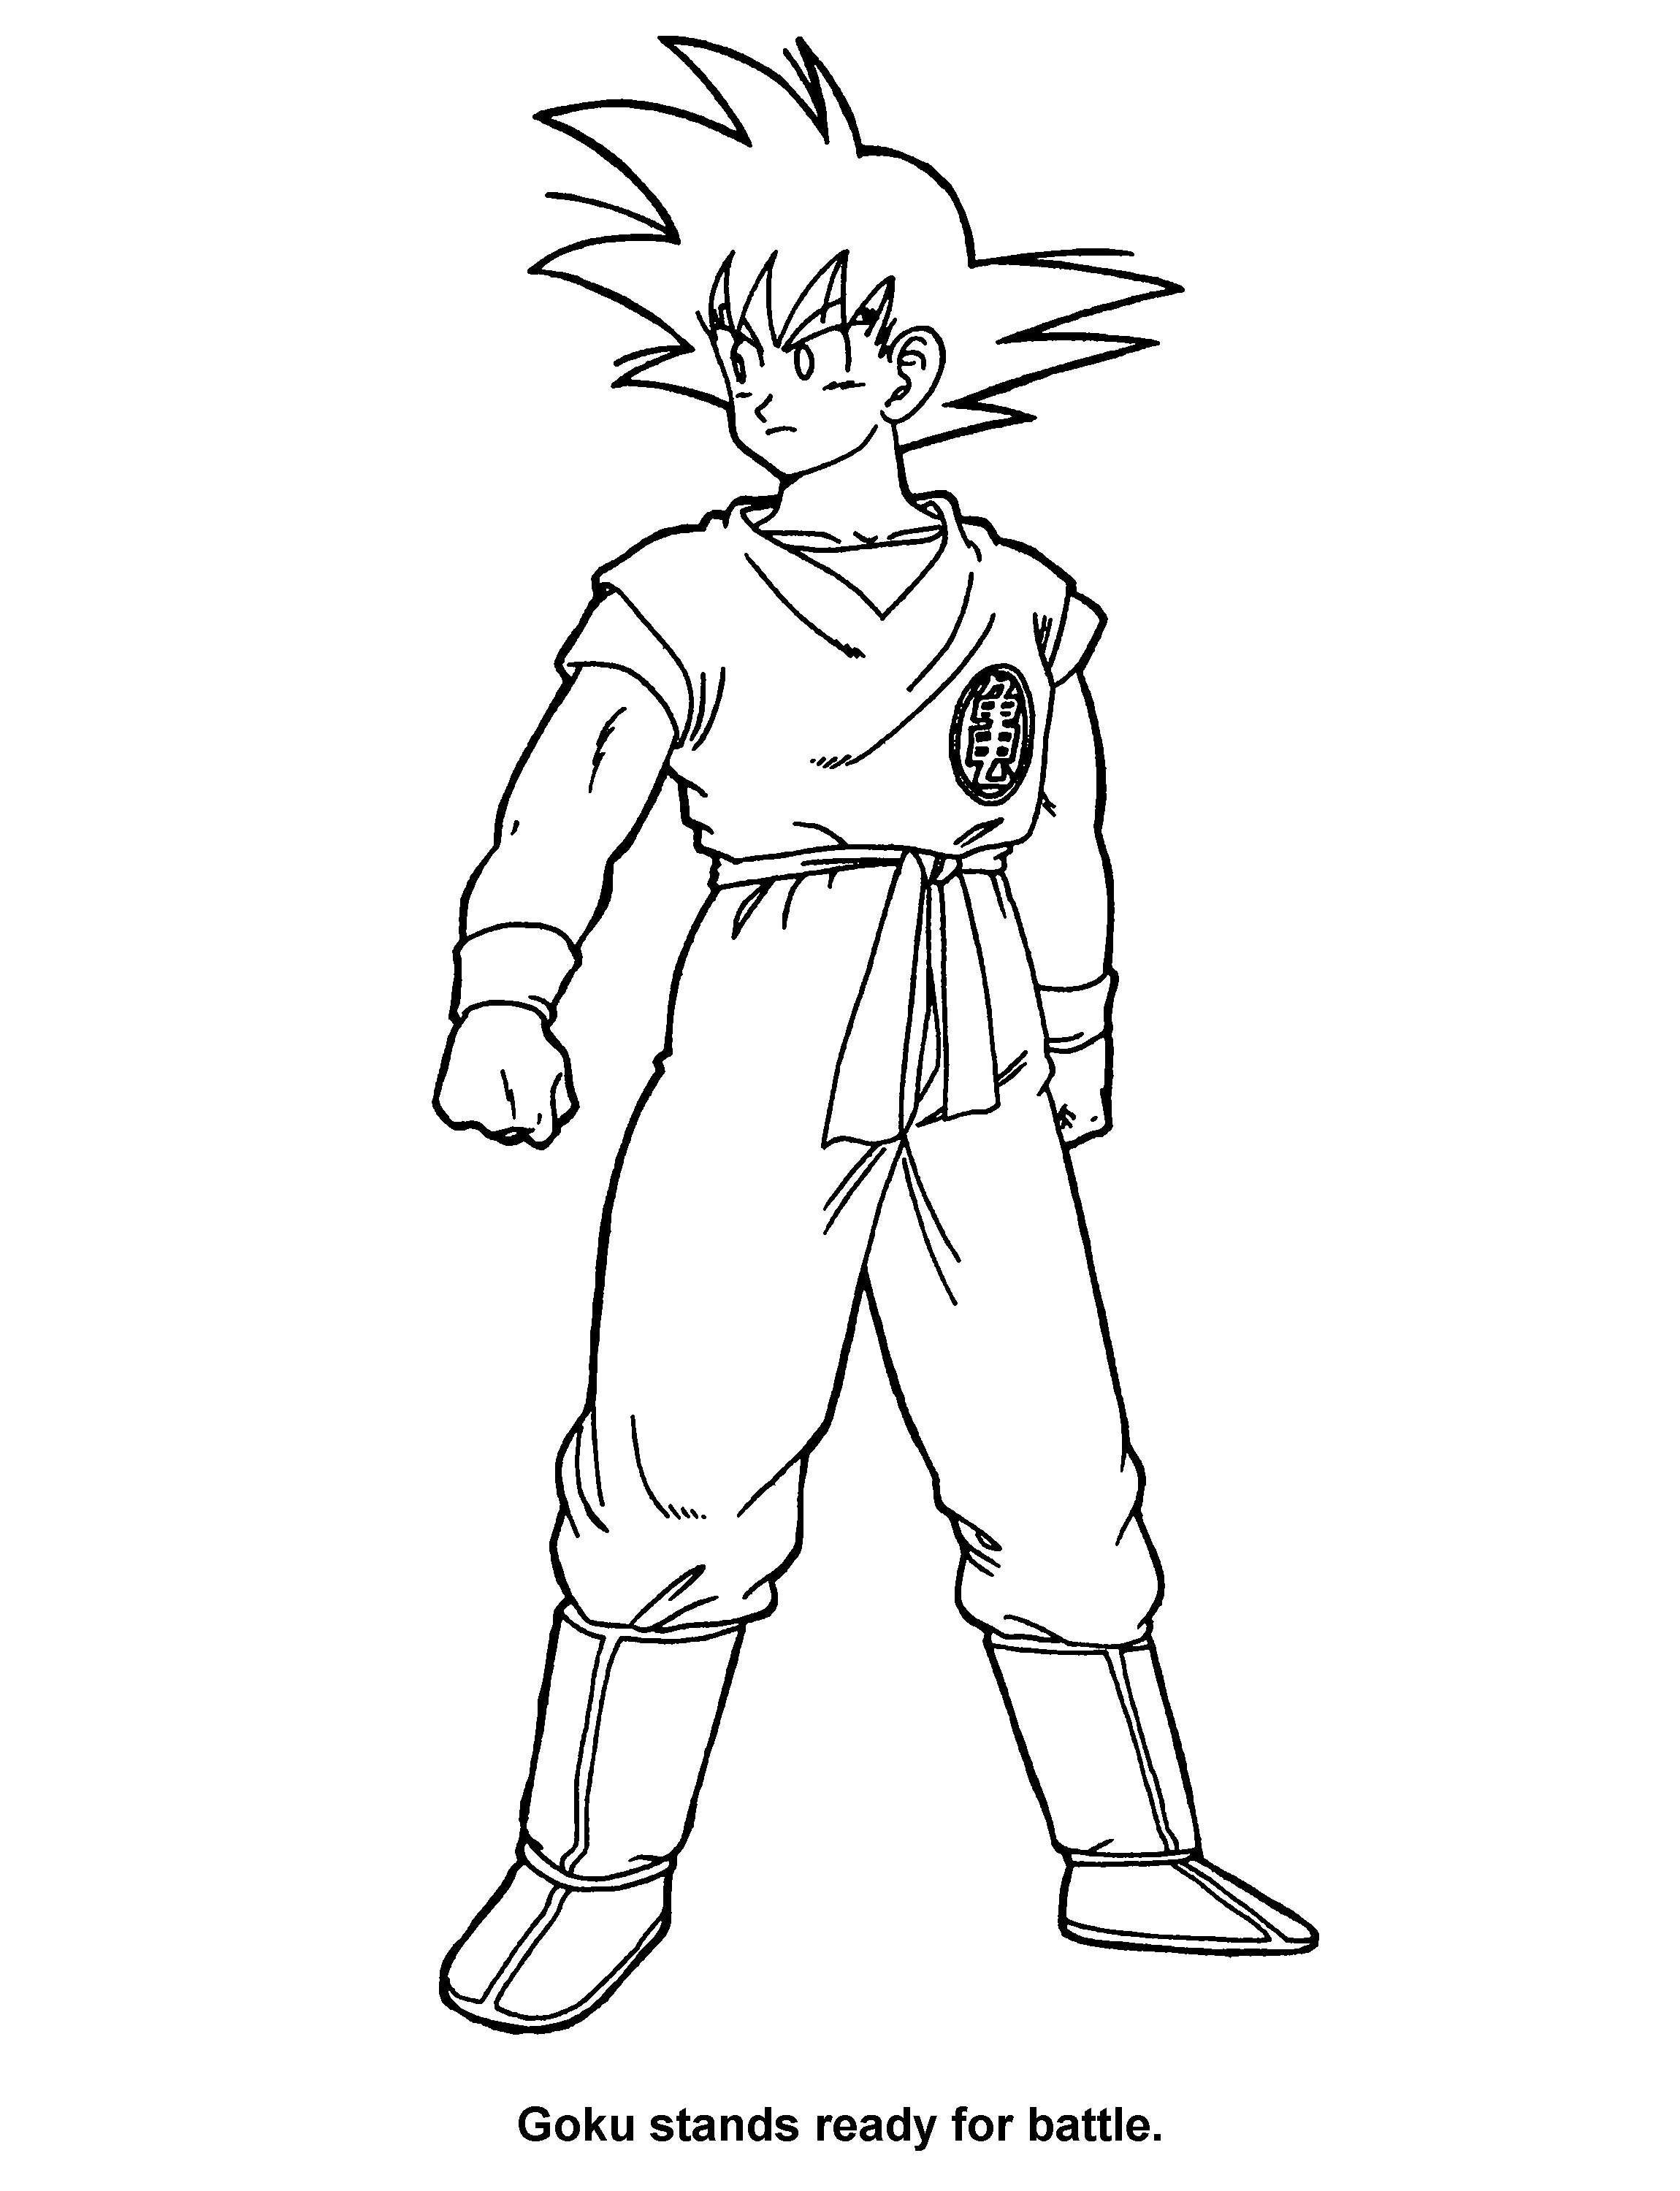 Dragon ball z Coloring Pages Coloringpages1001com